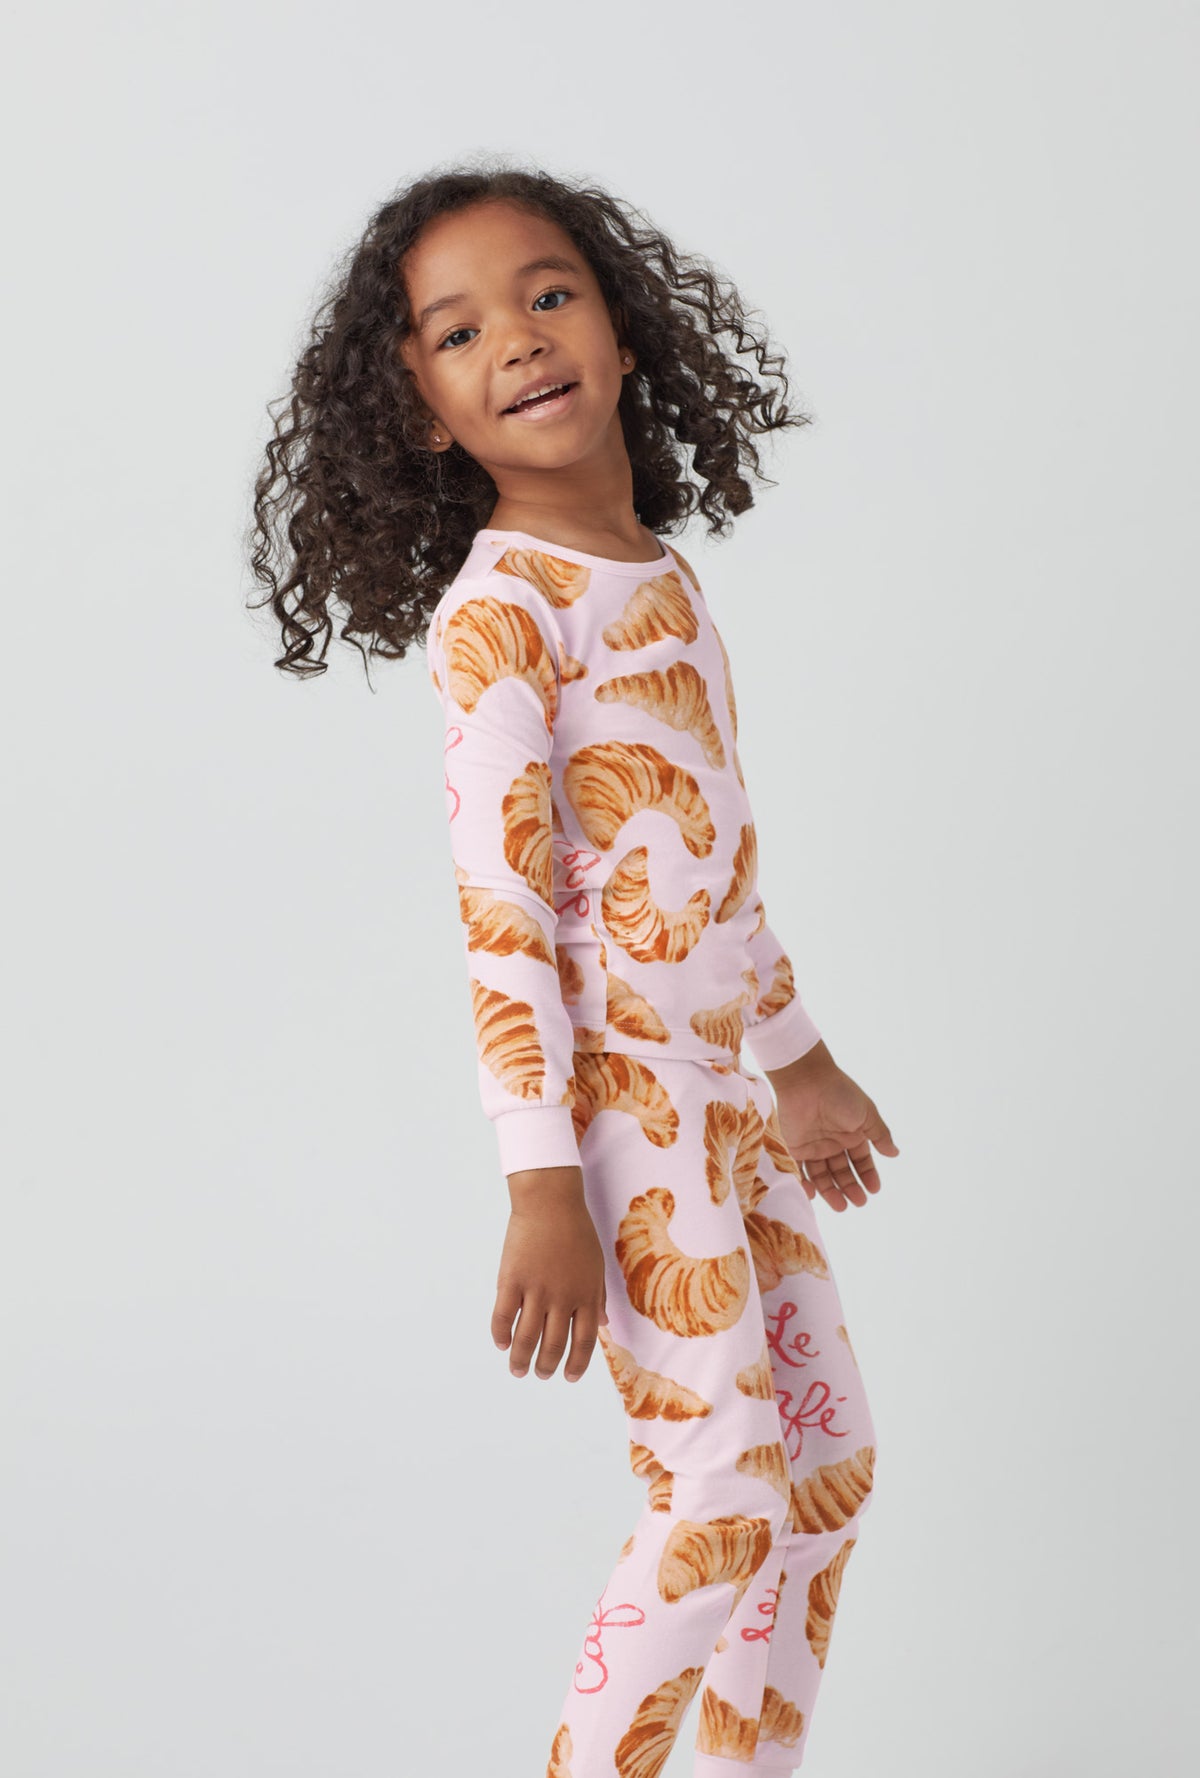 A girl wearing orange  Long Sleeve Stretch Jersey Kids PJ Set  with Le Cafe  print.